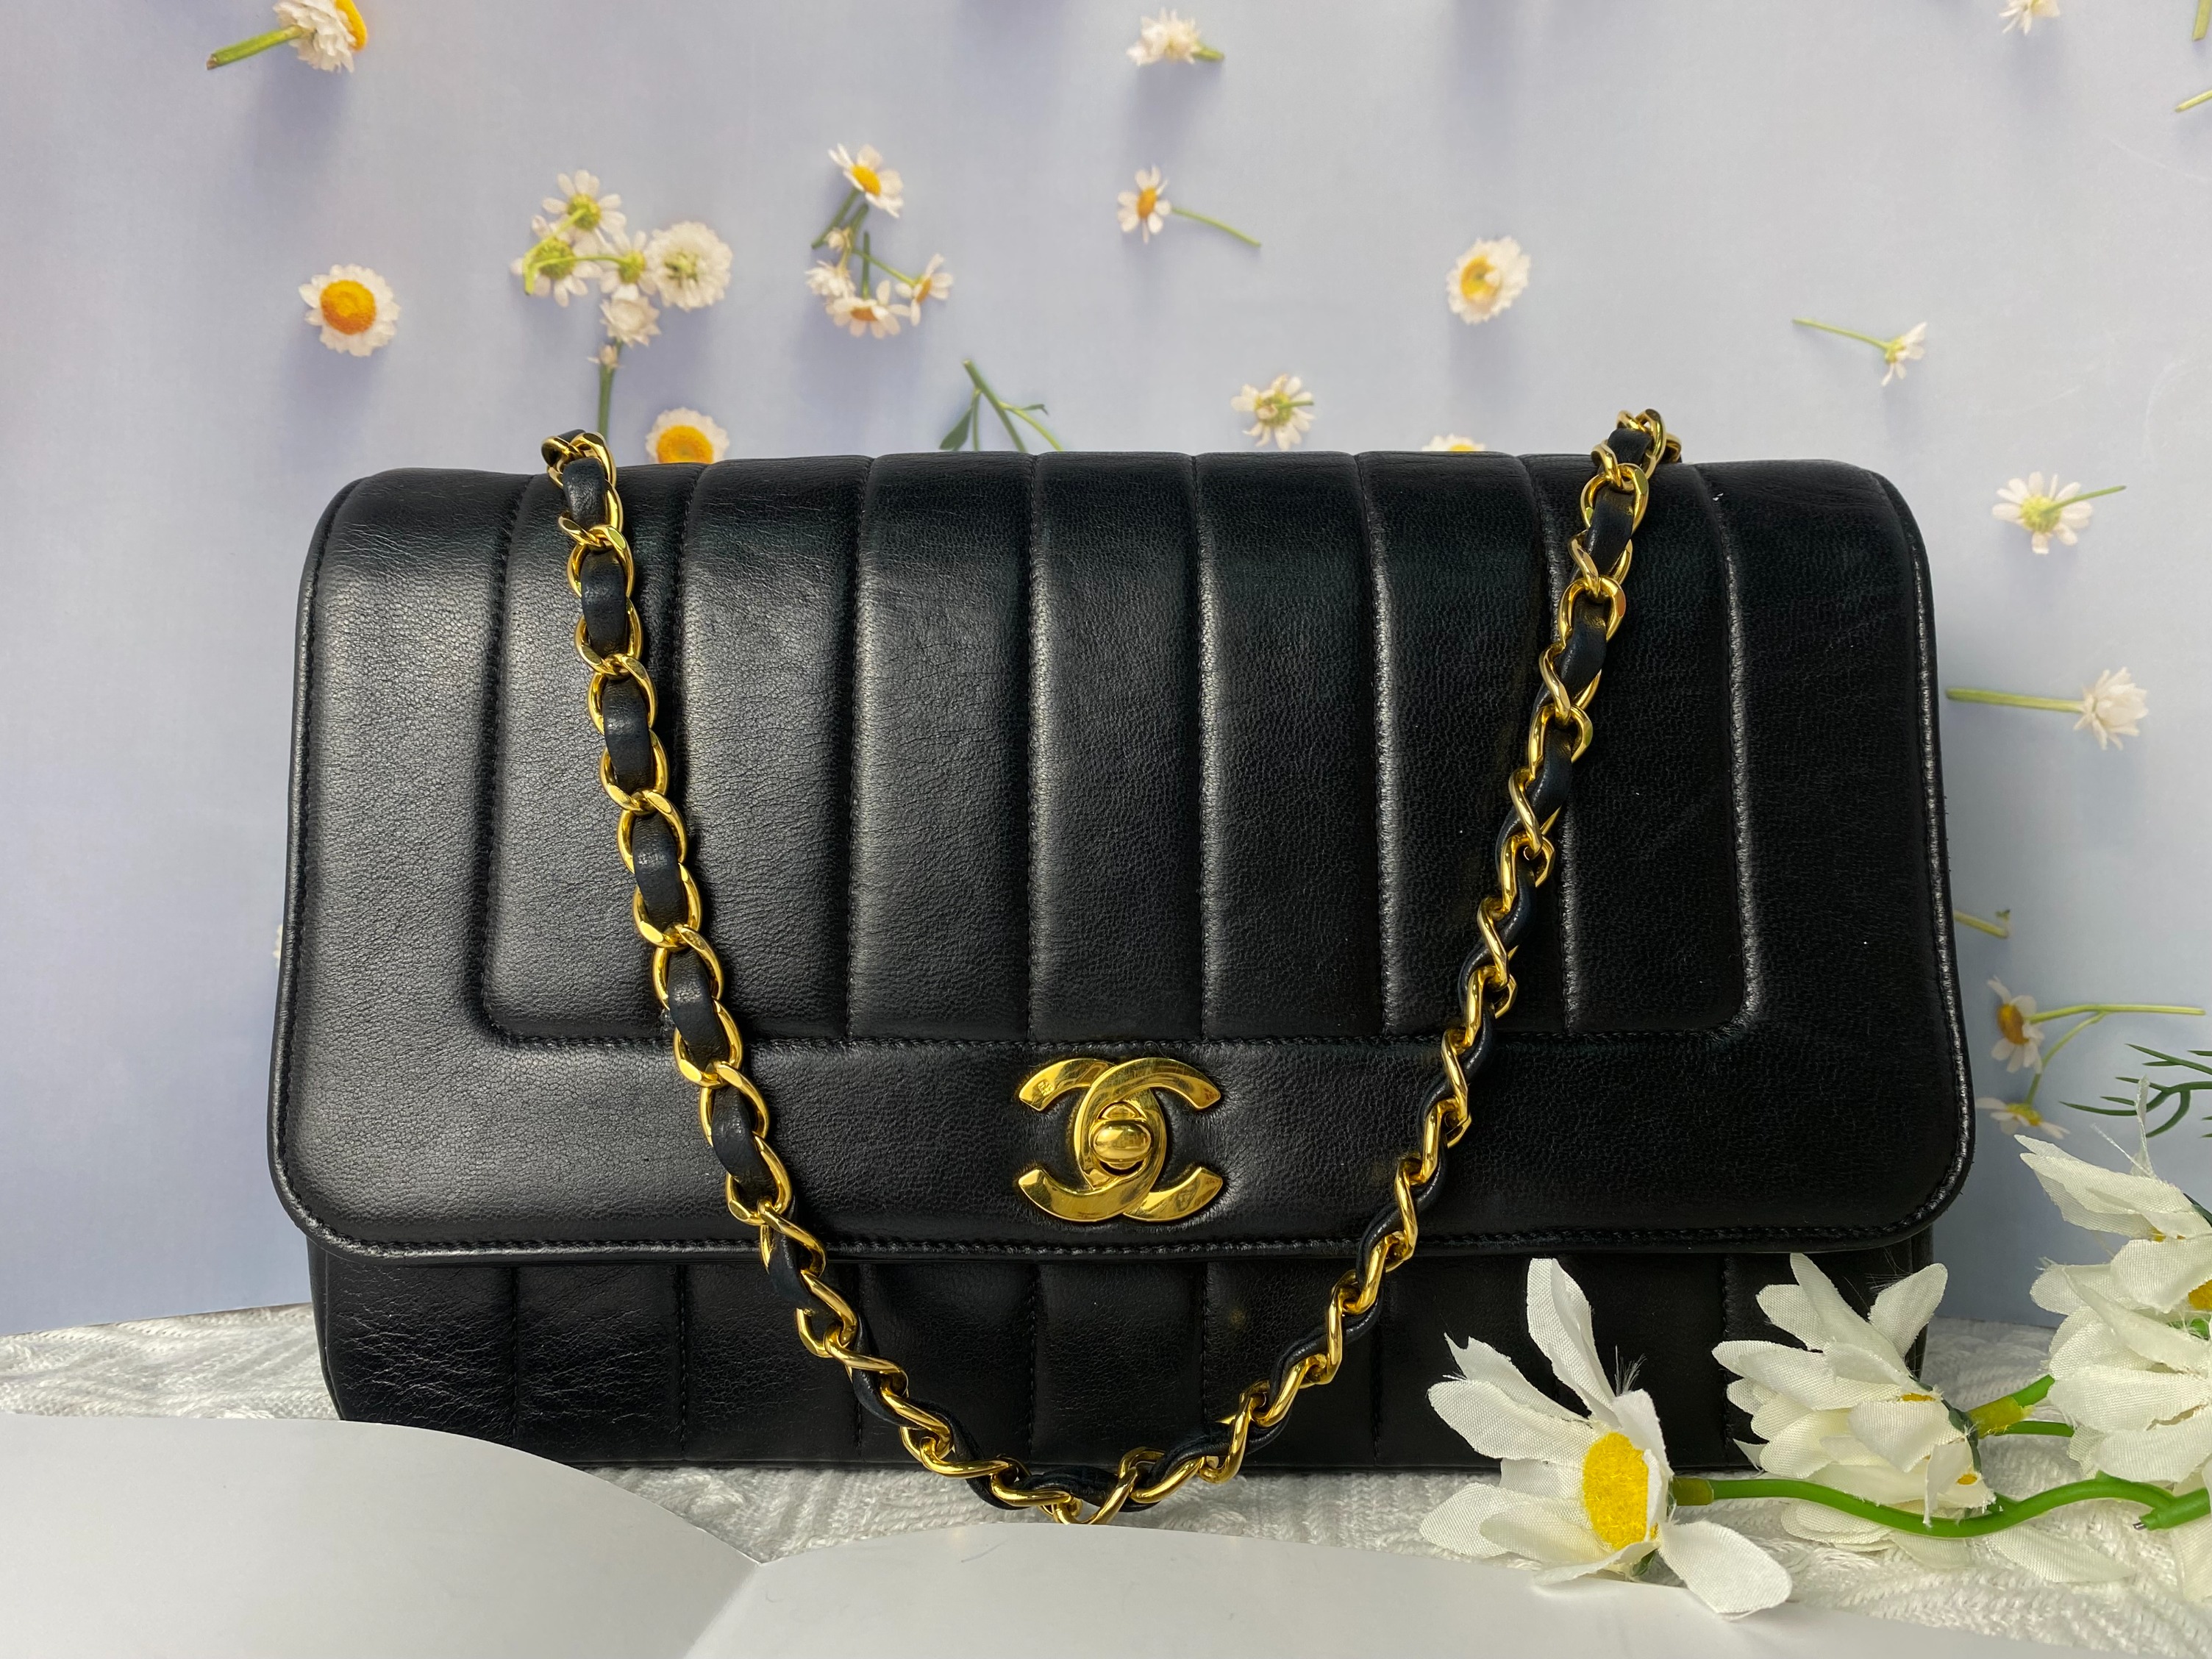 Chanel Business Affinity Small - Bijoux Bag Spa & Consignment